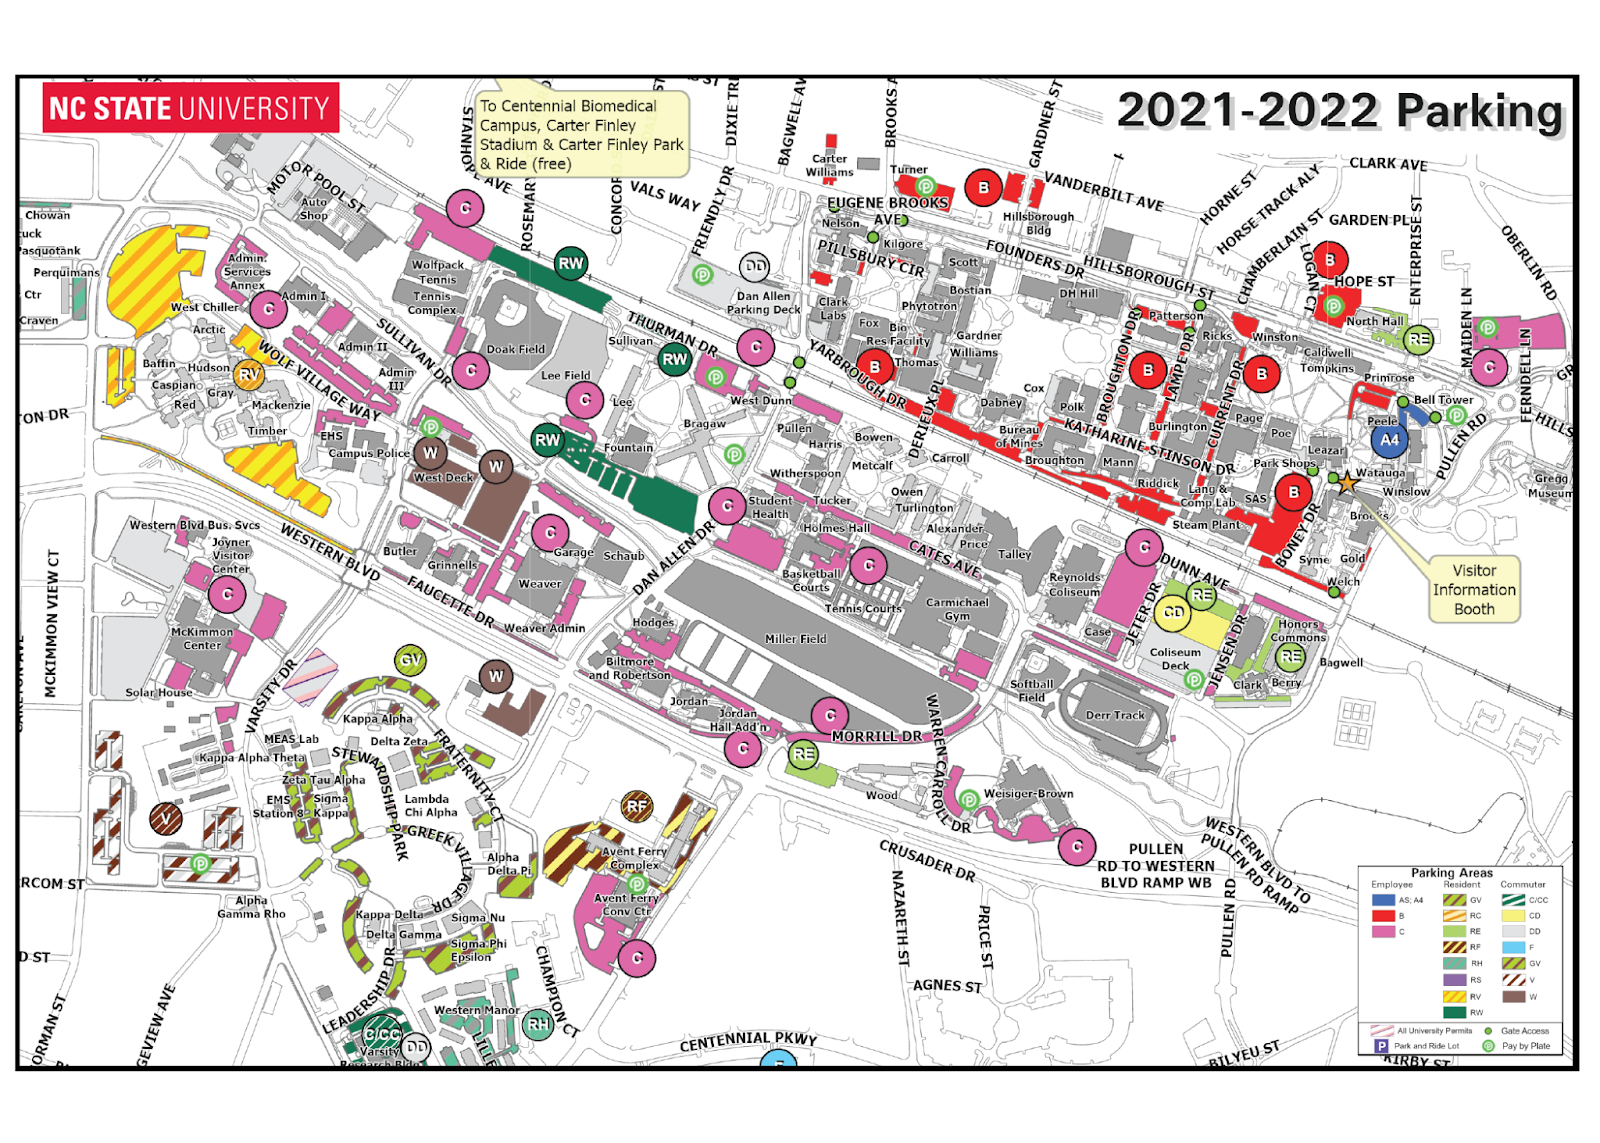 NC State 2021-2022 parking map showing all parking lots on main and centennial campus